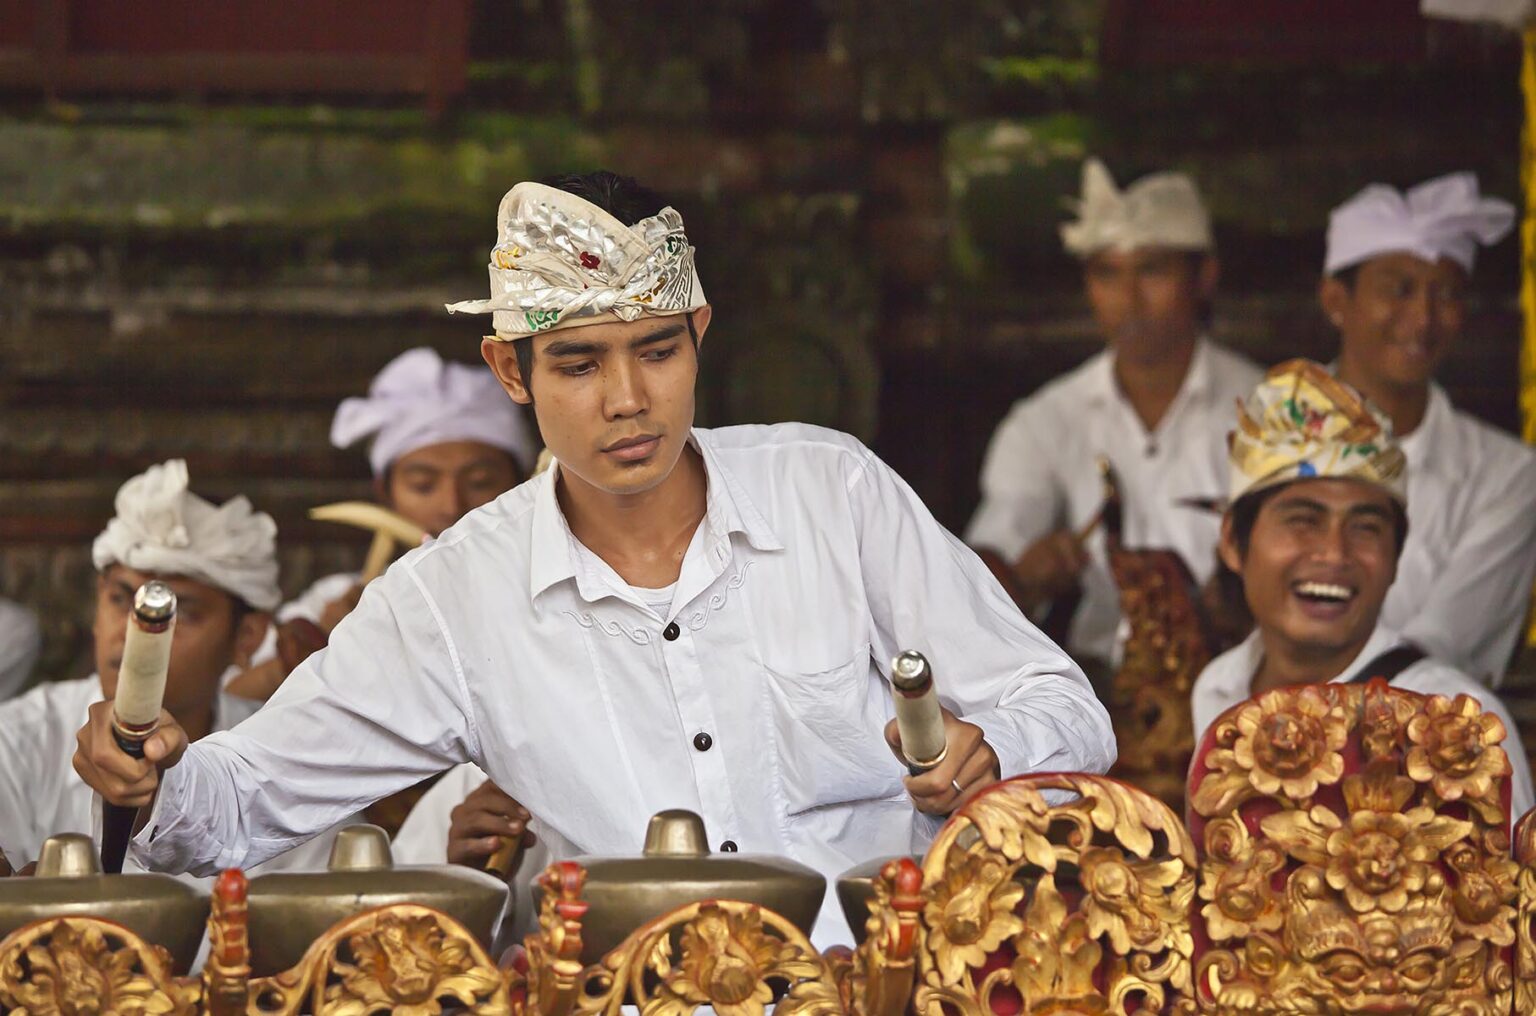 A BALINESE musician plays a GAMELAN at the temple of PURA BEJI in the village of Mas during the GALUNGAN FESTIVAL - UBUD, BALI, INDONESIA